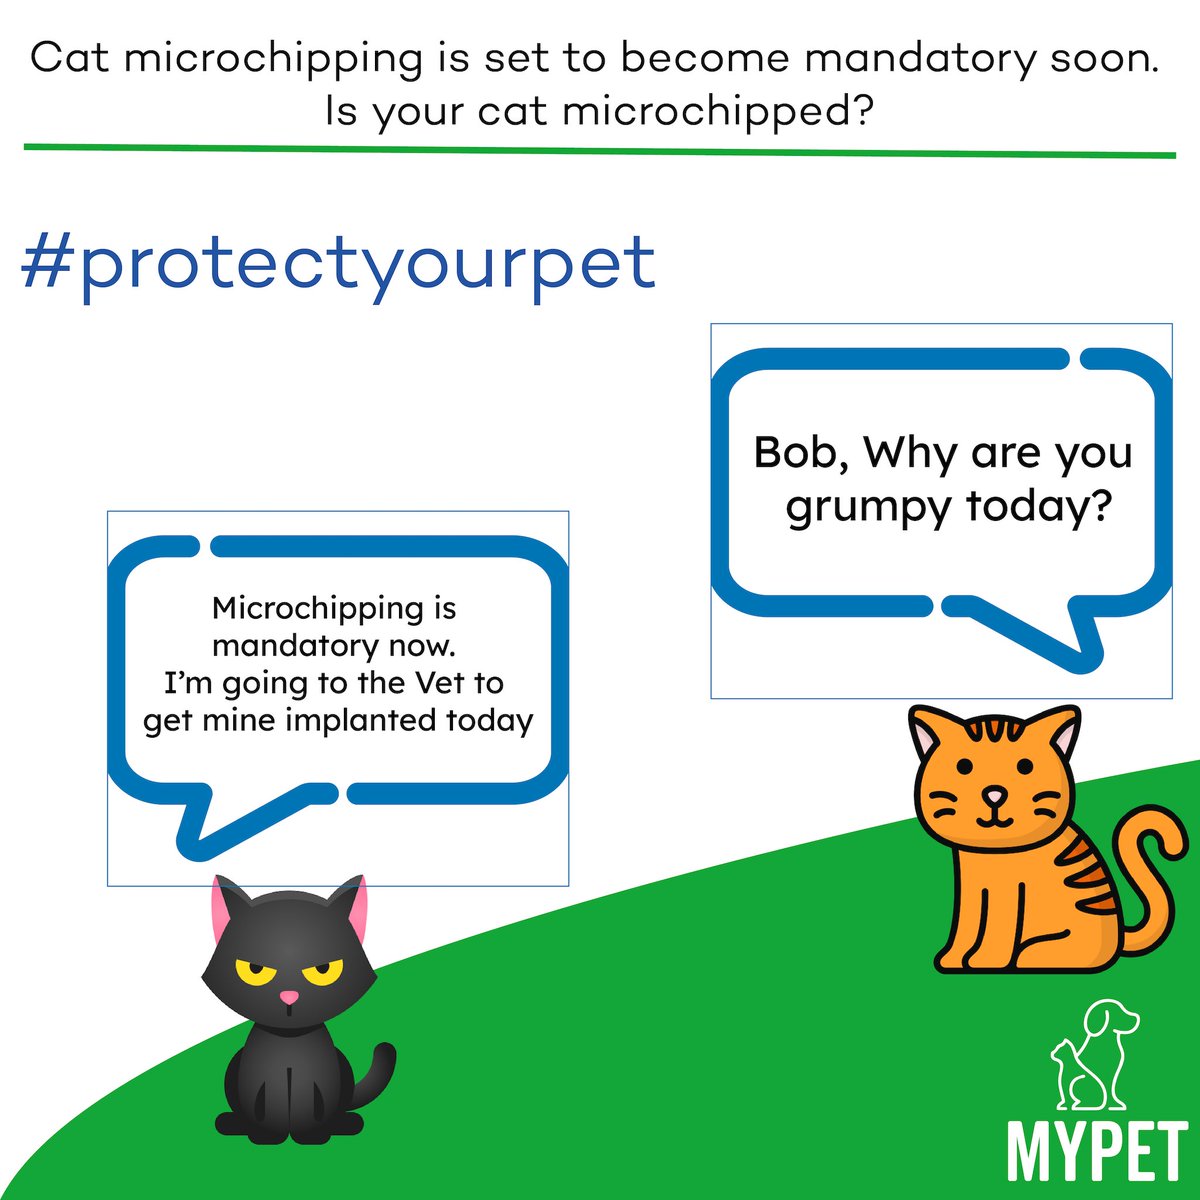 Did you know cat microchipping will become mandatory soon? Check if your cat is microchipped and ensure your details are up to date!

#catmicrochipping #microchipping #microchips #petmicrochips #petdatabase #MyPet #petsafety #smallbutmightythemicrochip